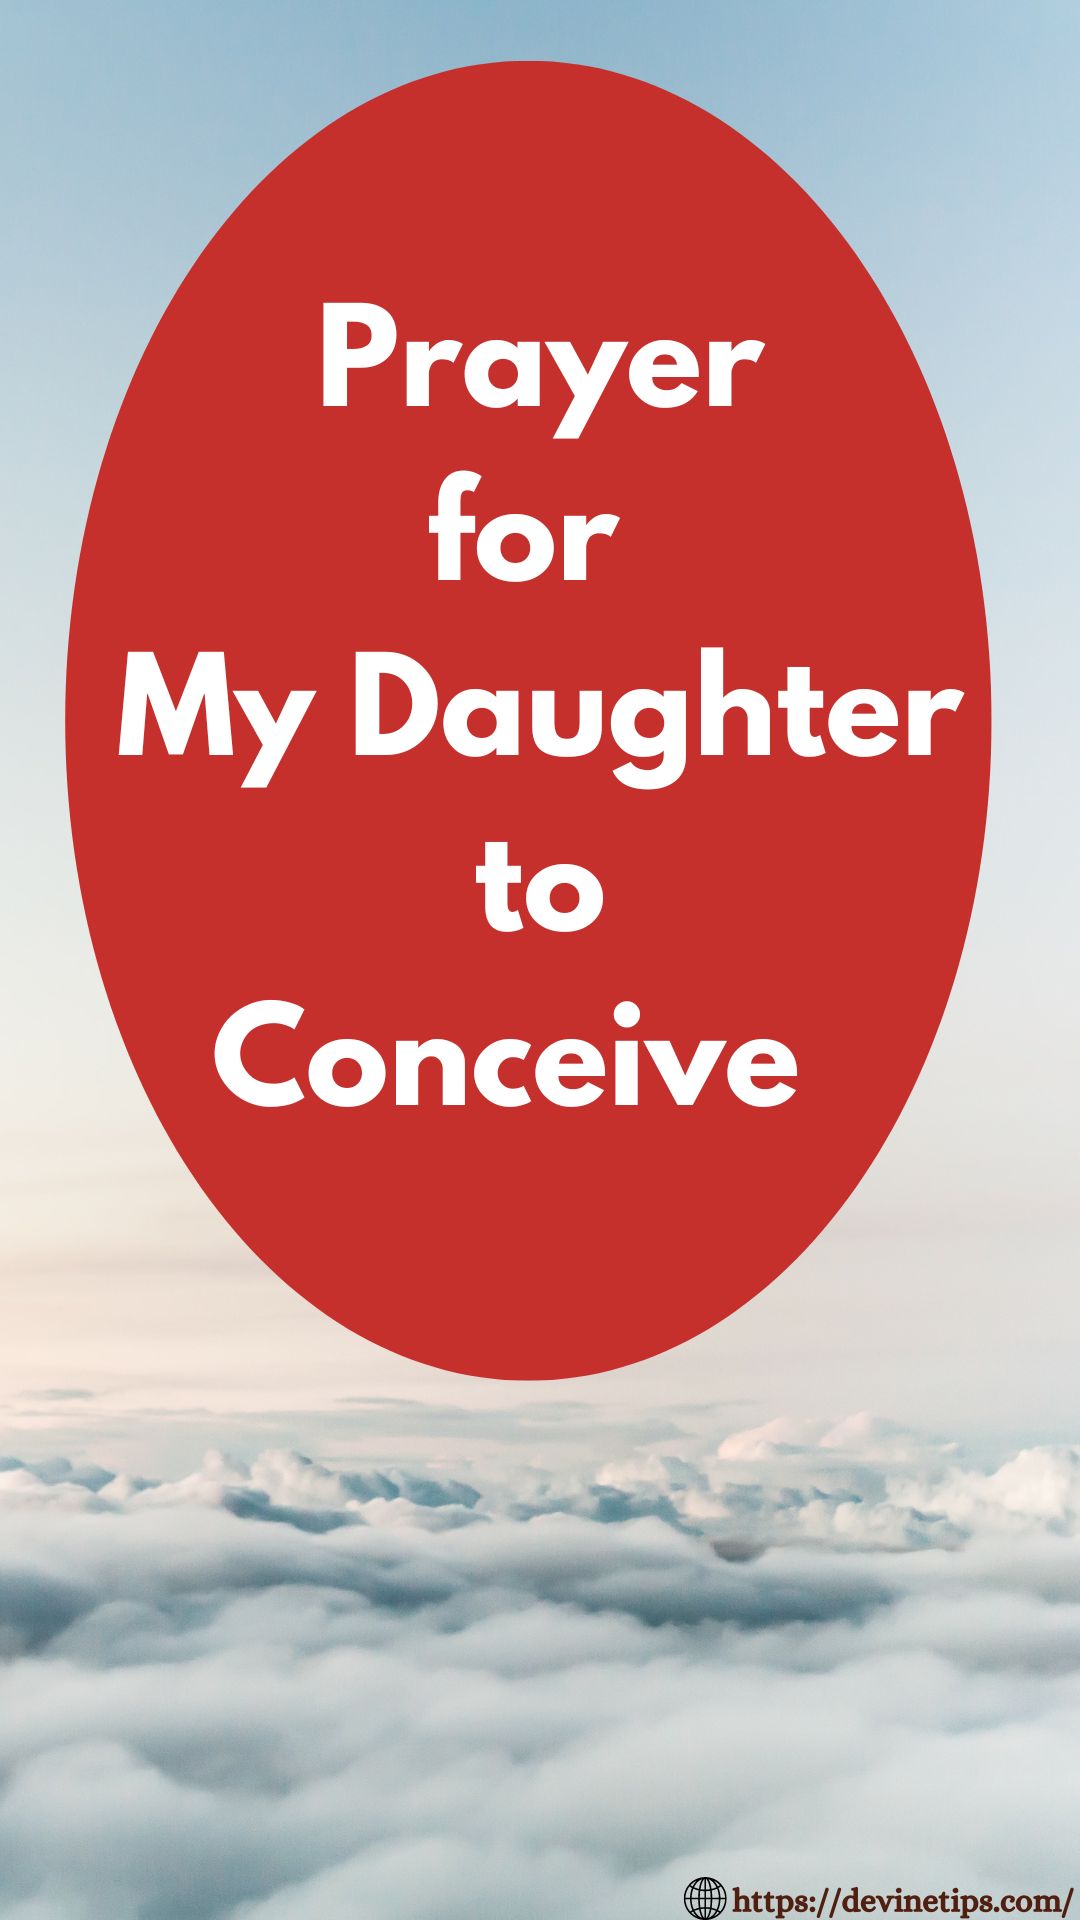 Prayer for my daughter to conceive